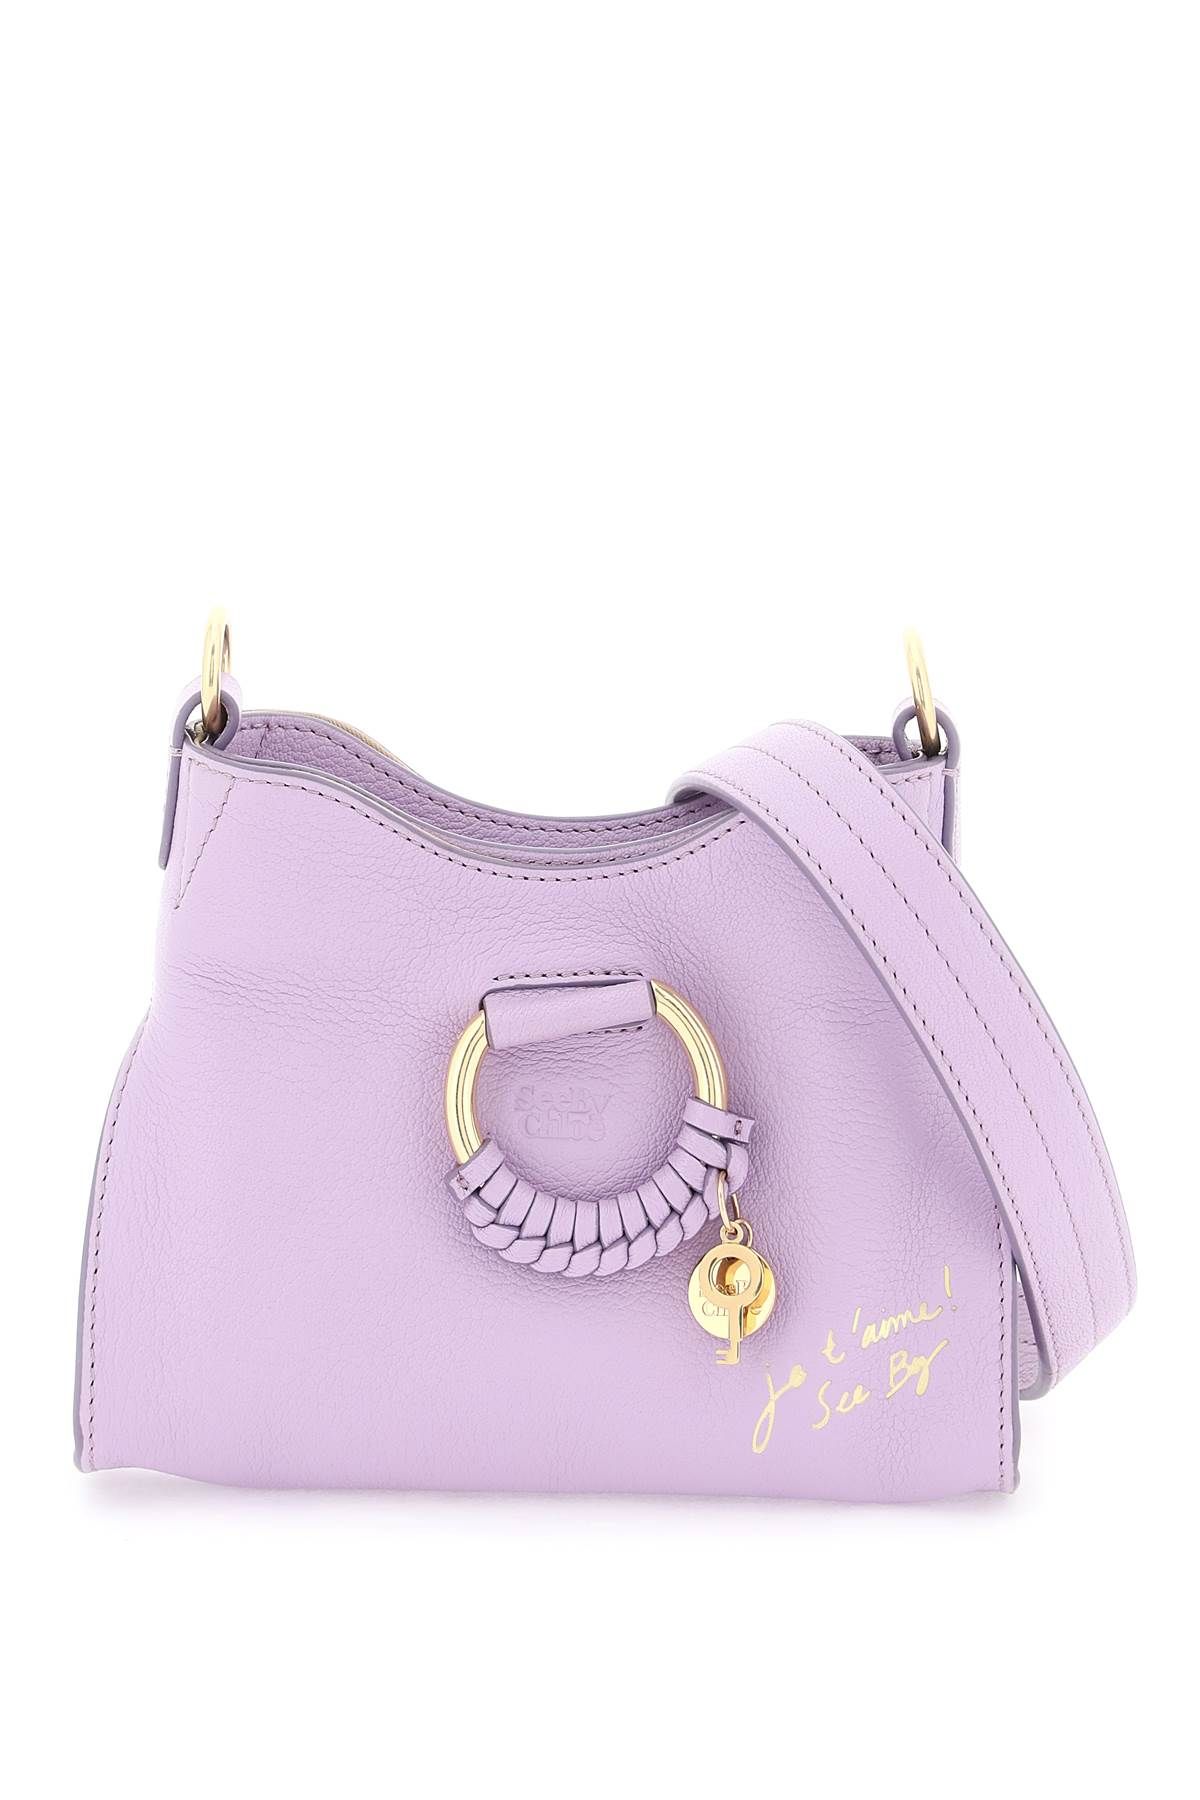 See By Chloé "small Joan Shoulder Bag With Cross In Purple